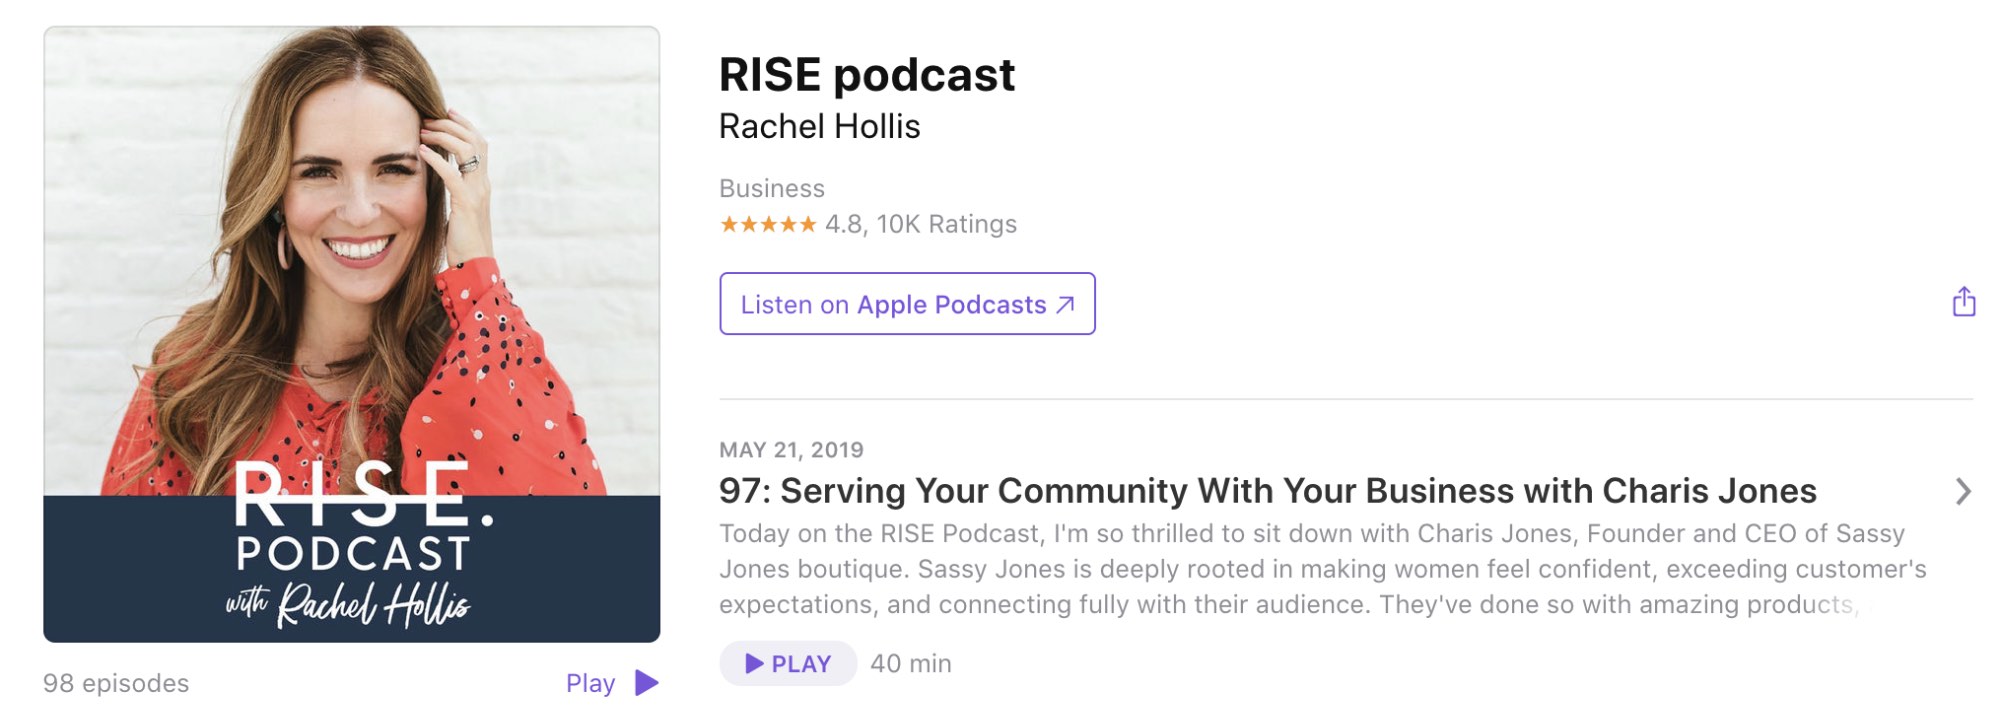 rise podcast